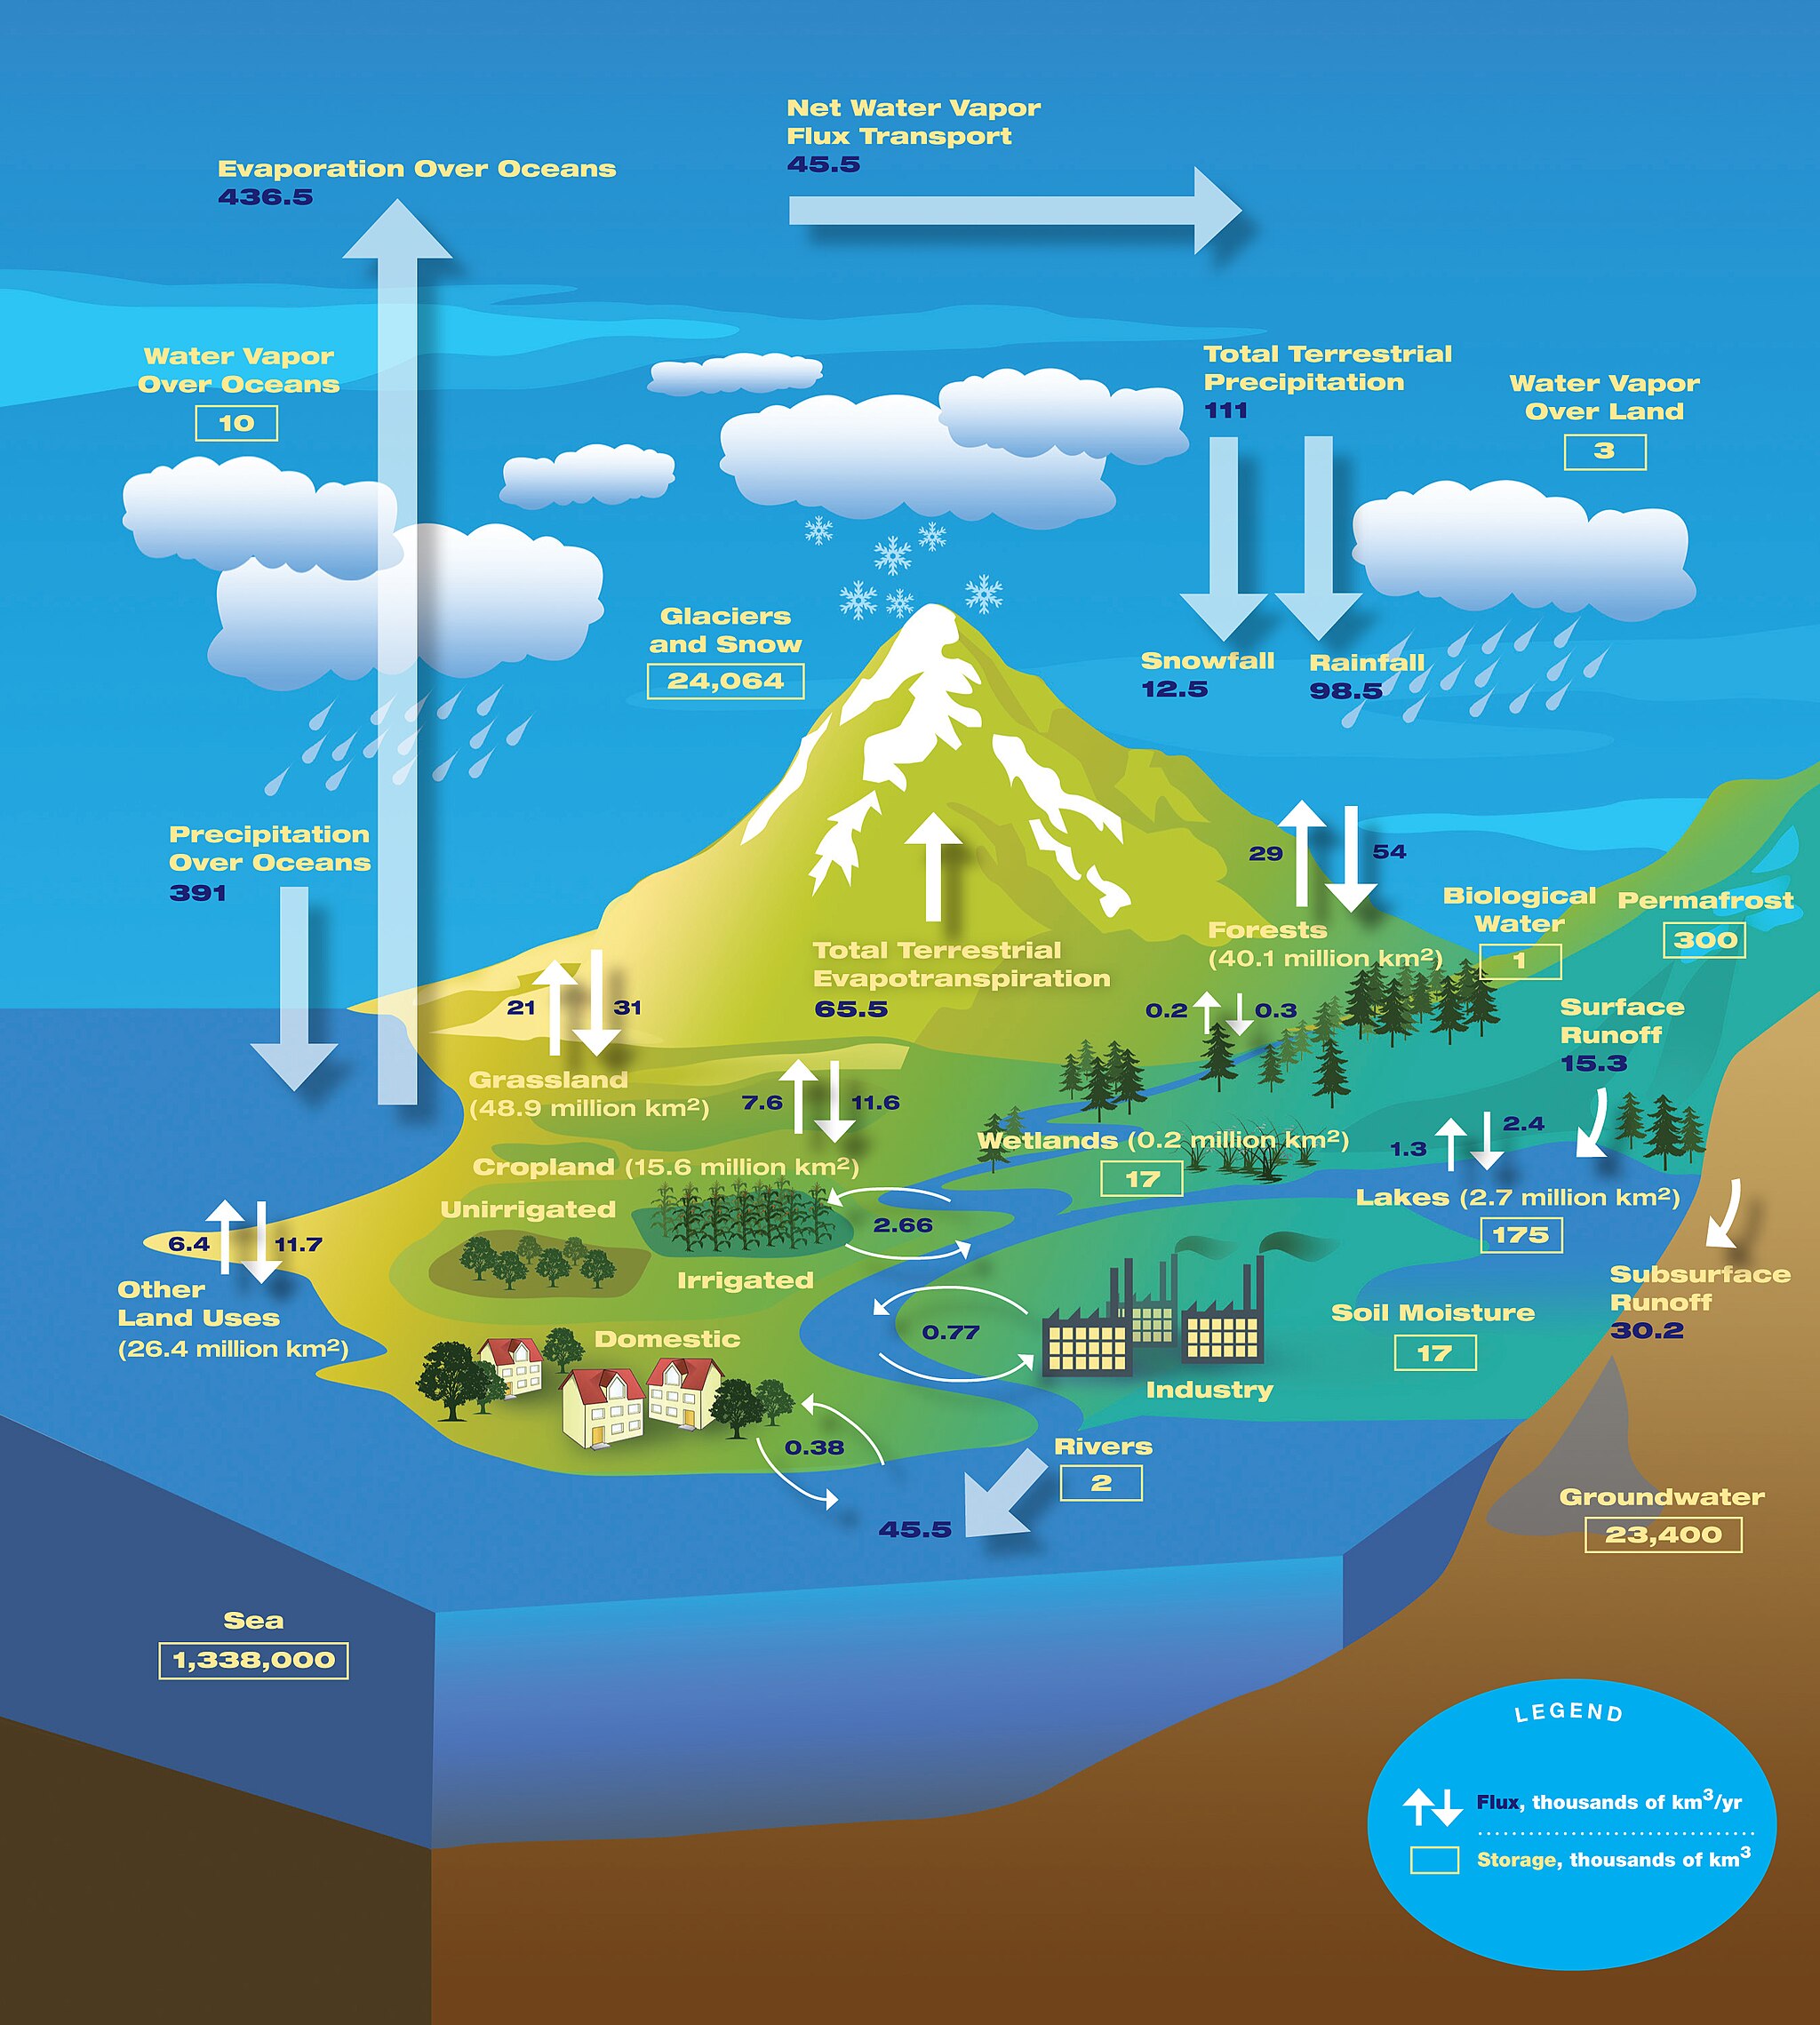 A diagram of the water cycle shows the steps of evaporation, condensation, precipitation, transpiration and infiltration, as well as the added components of industrial, domestic, and agricultural water usage.